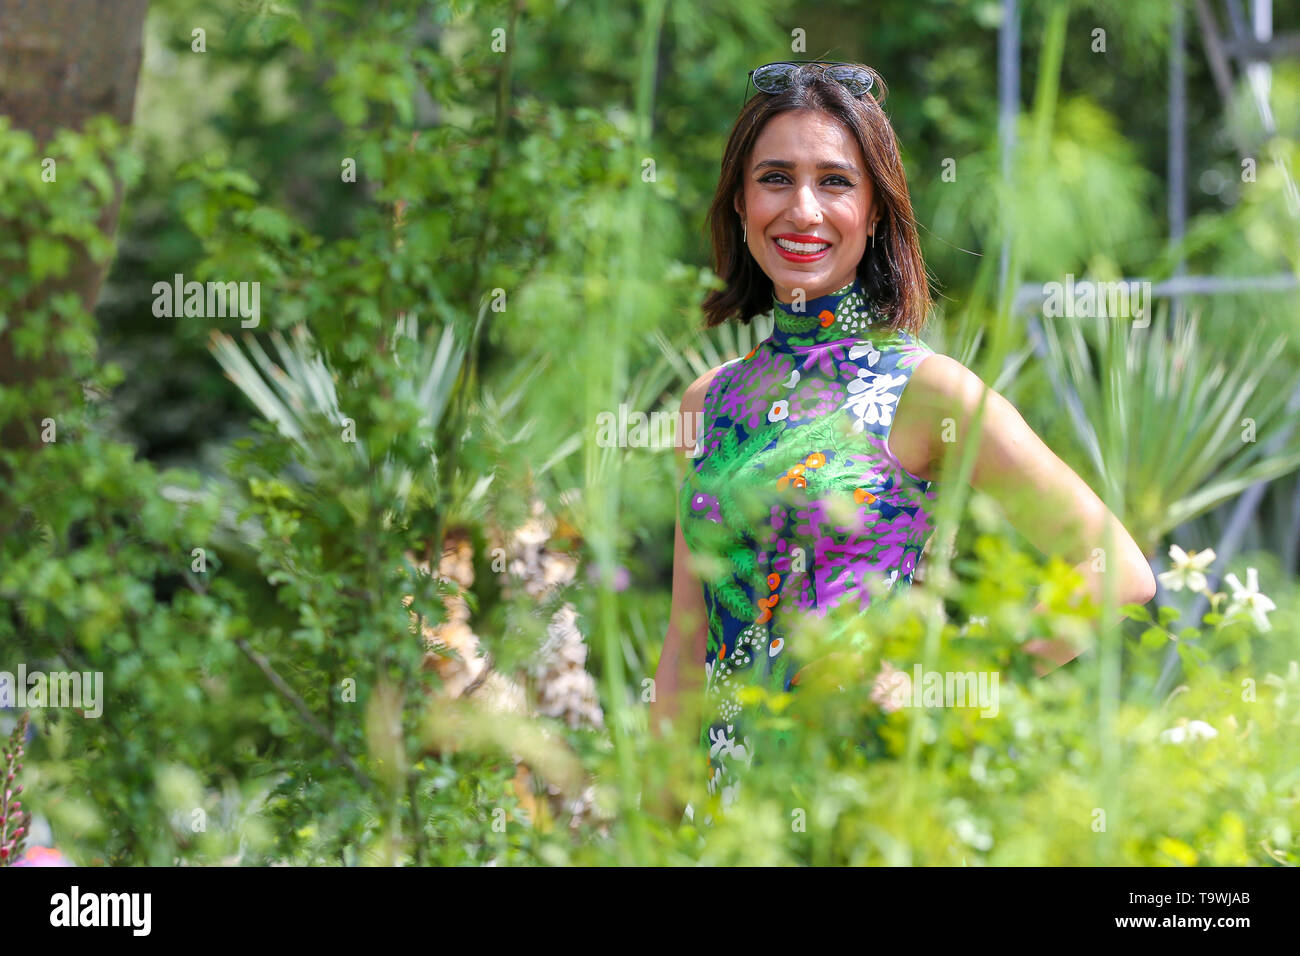 May 20, 2019 - London, United Kingdom - Anita Rani seen during the Chelsea Flower Show..The Royal Horticultural Society Chelsea Flower Show is an annual garden show over five days in the grounds of the Royal Hospital Chelsea in West London. The show is open to the public from 21 May until 25 May 2019. (Credit Image: © Dinendra Haria/SOPA Images via ZUMA Wire) Stock Photo